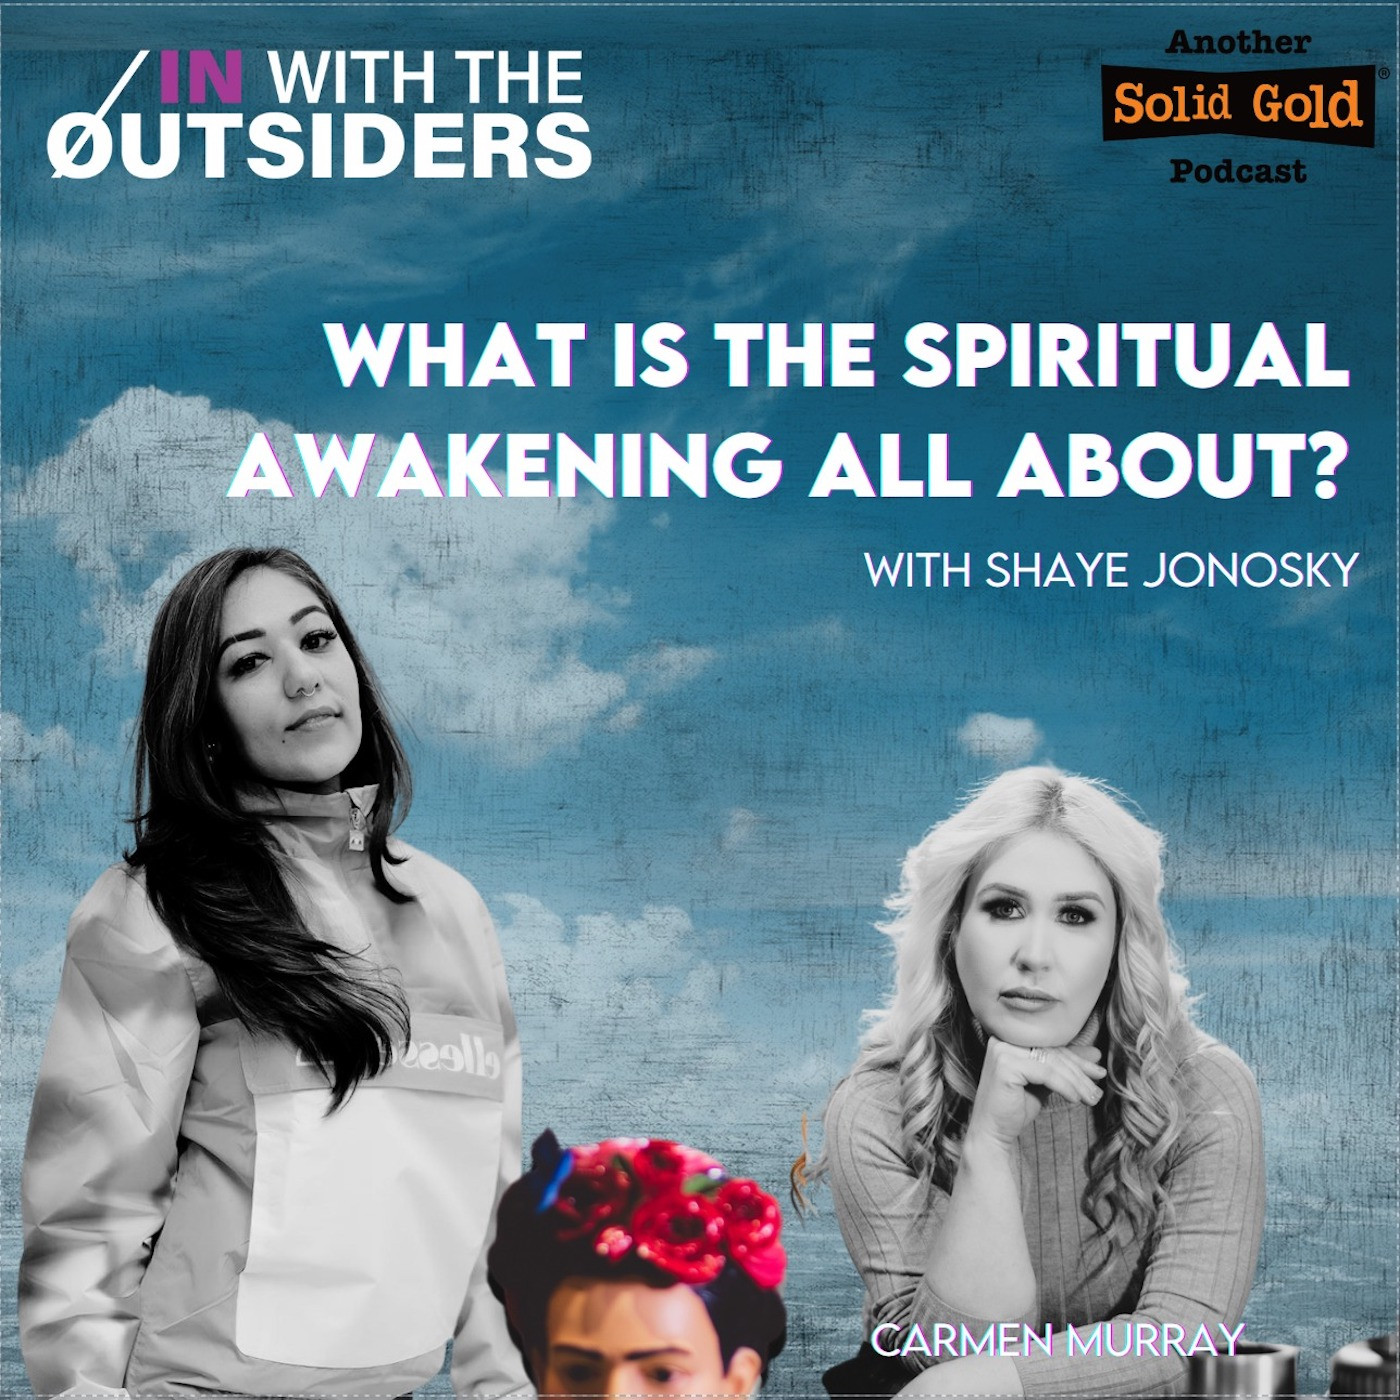 S02E01 What is the Spiritual Awakening all about?